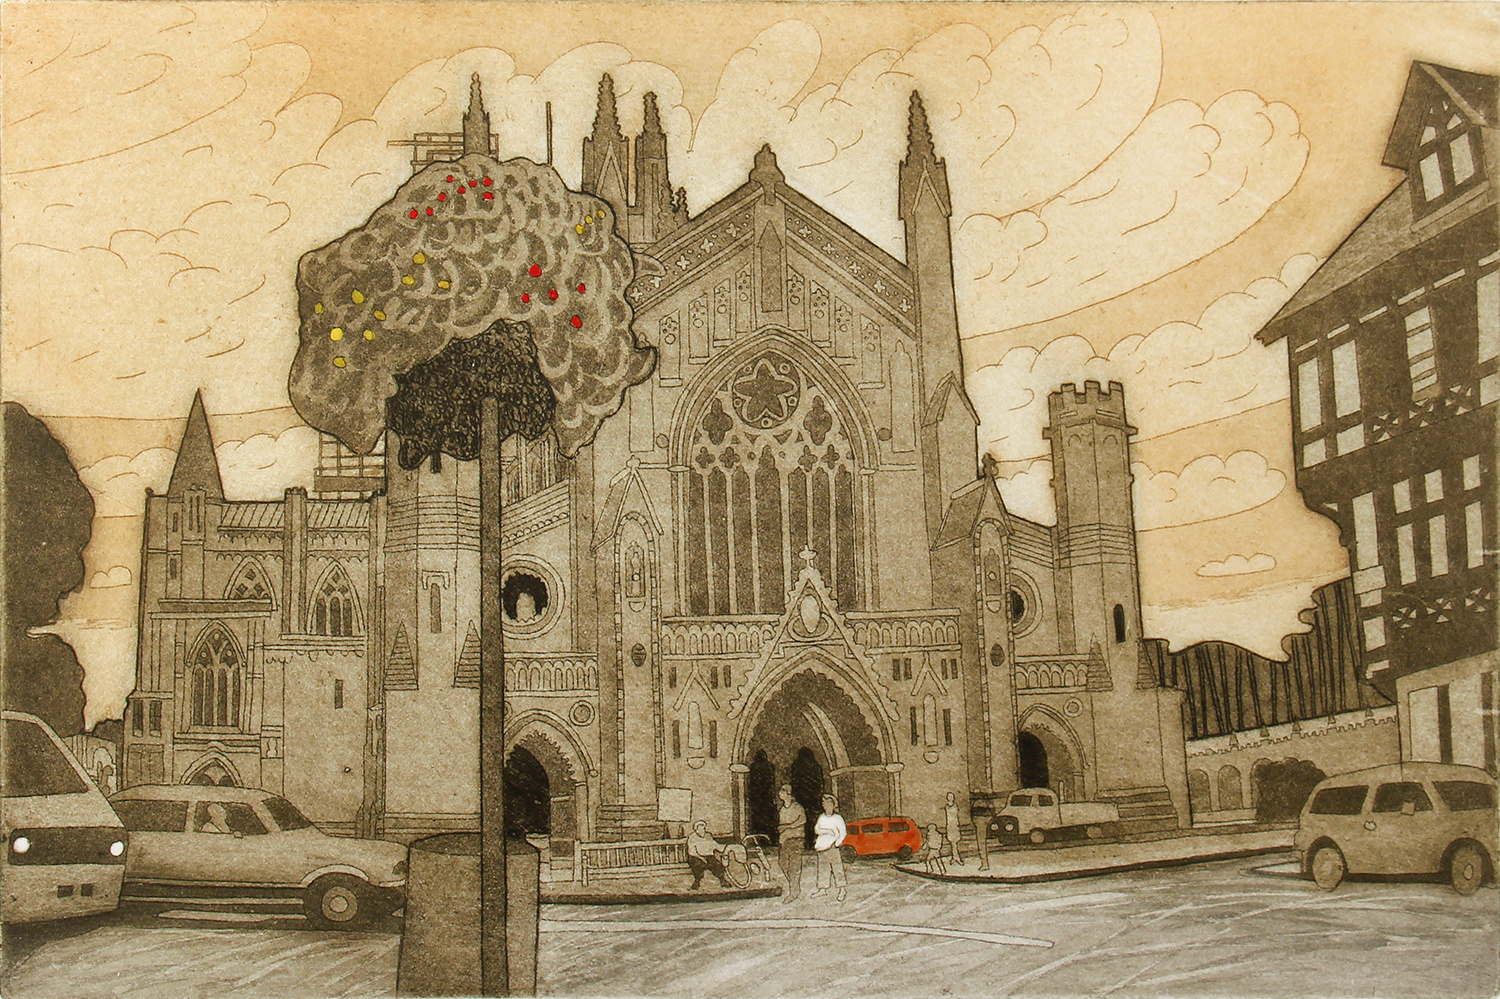 Hereford Cathedral by John Brunsdon